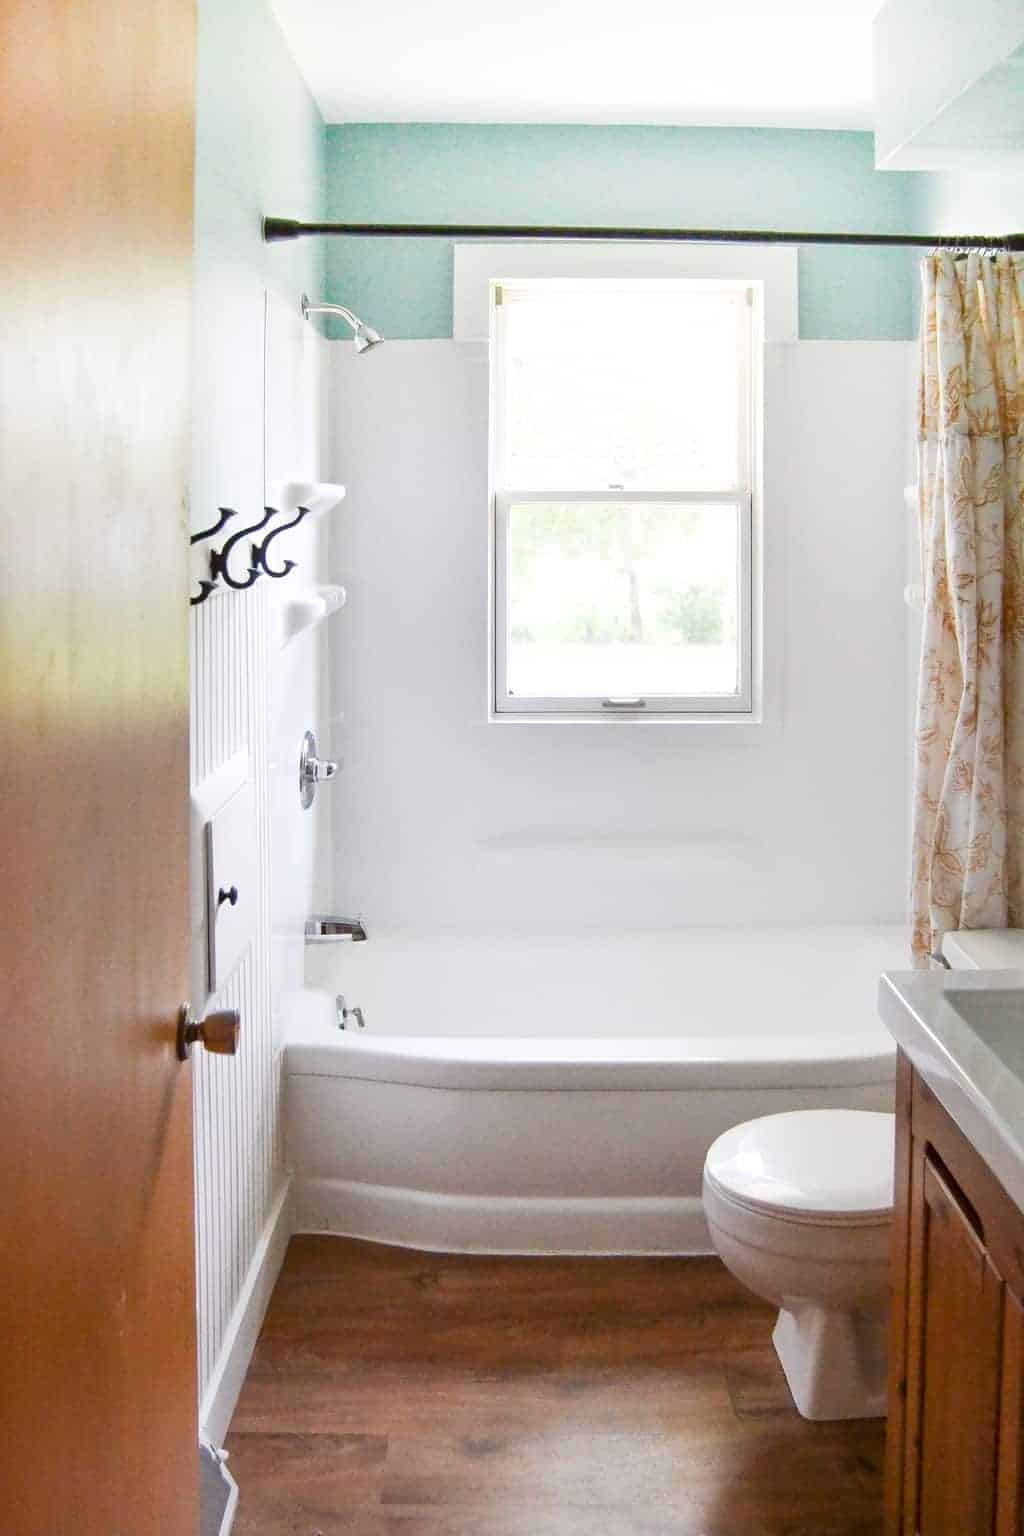 How to Paint a Tub with Rustoleum Tub Paint (& What NOT to Do!)